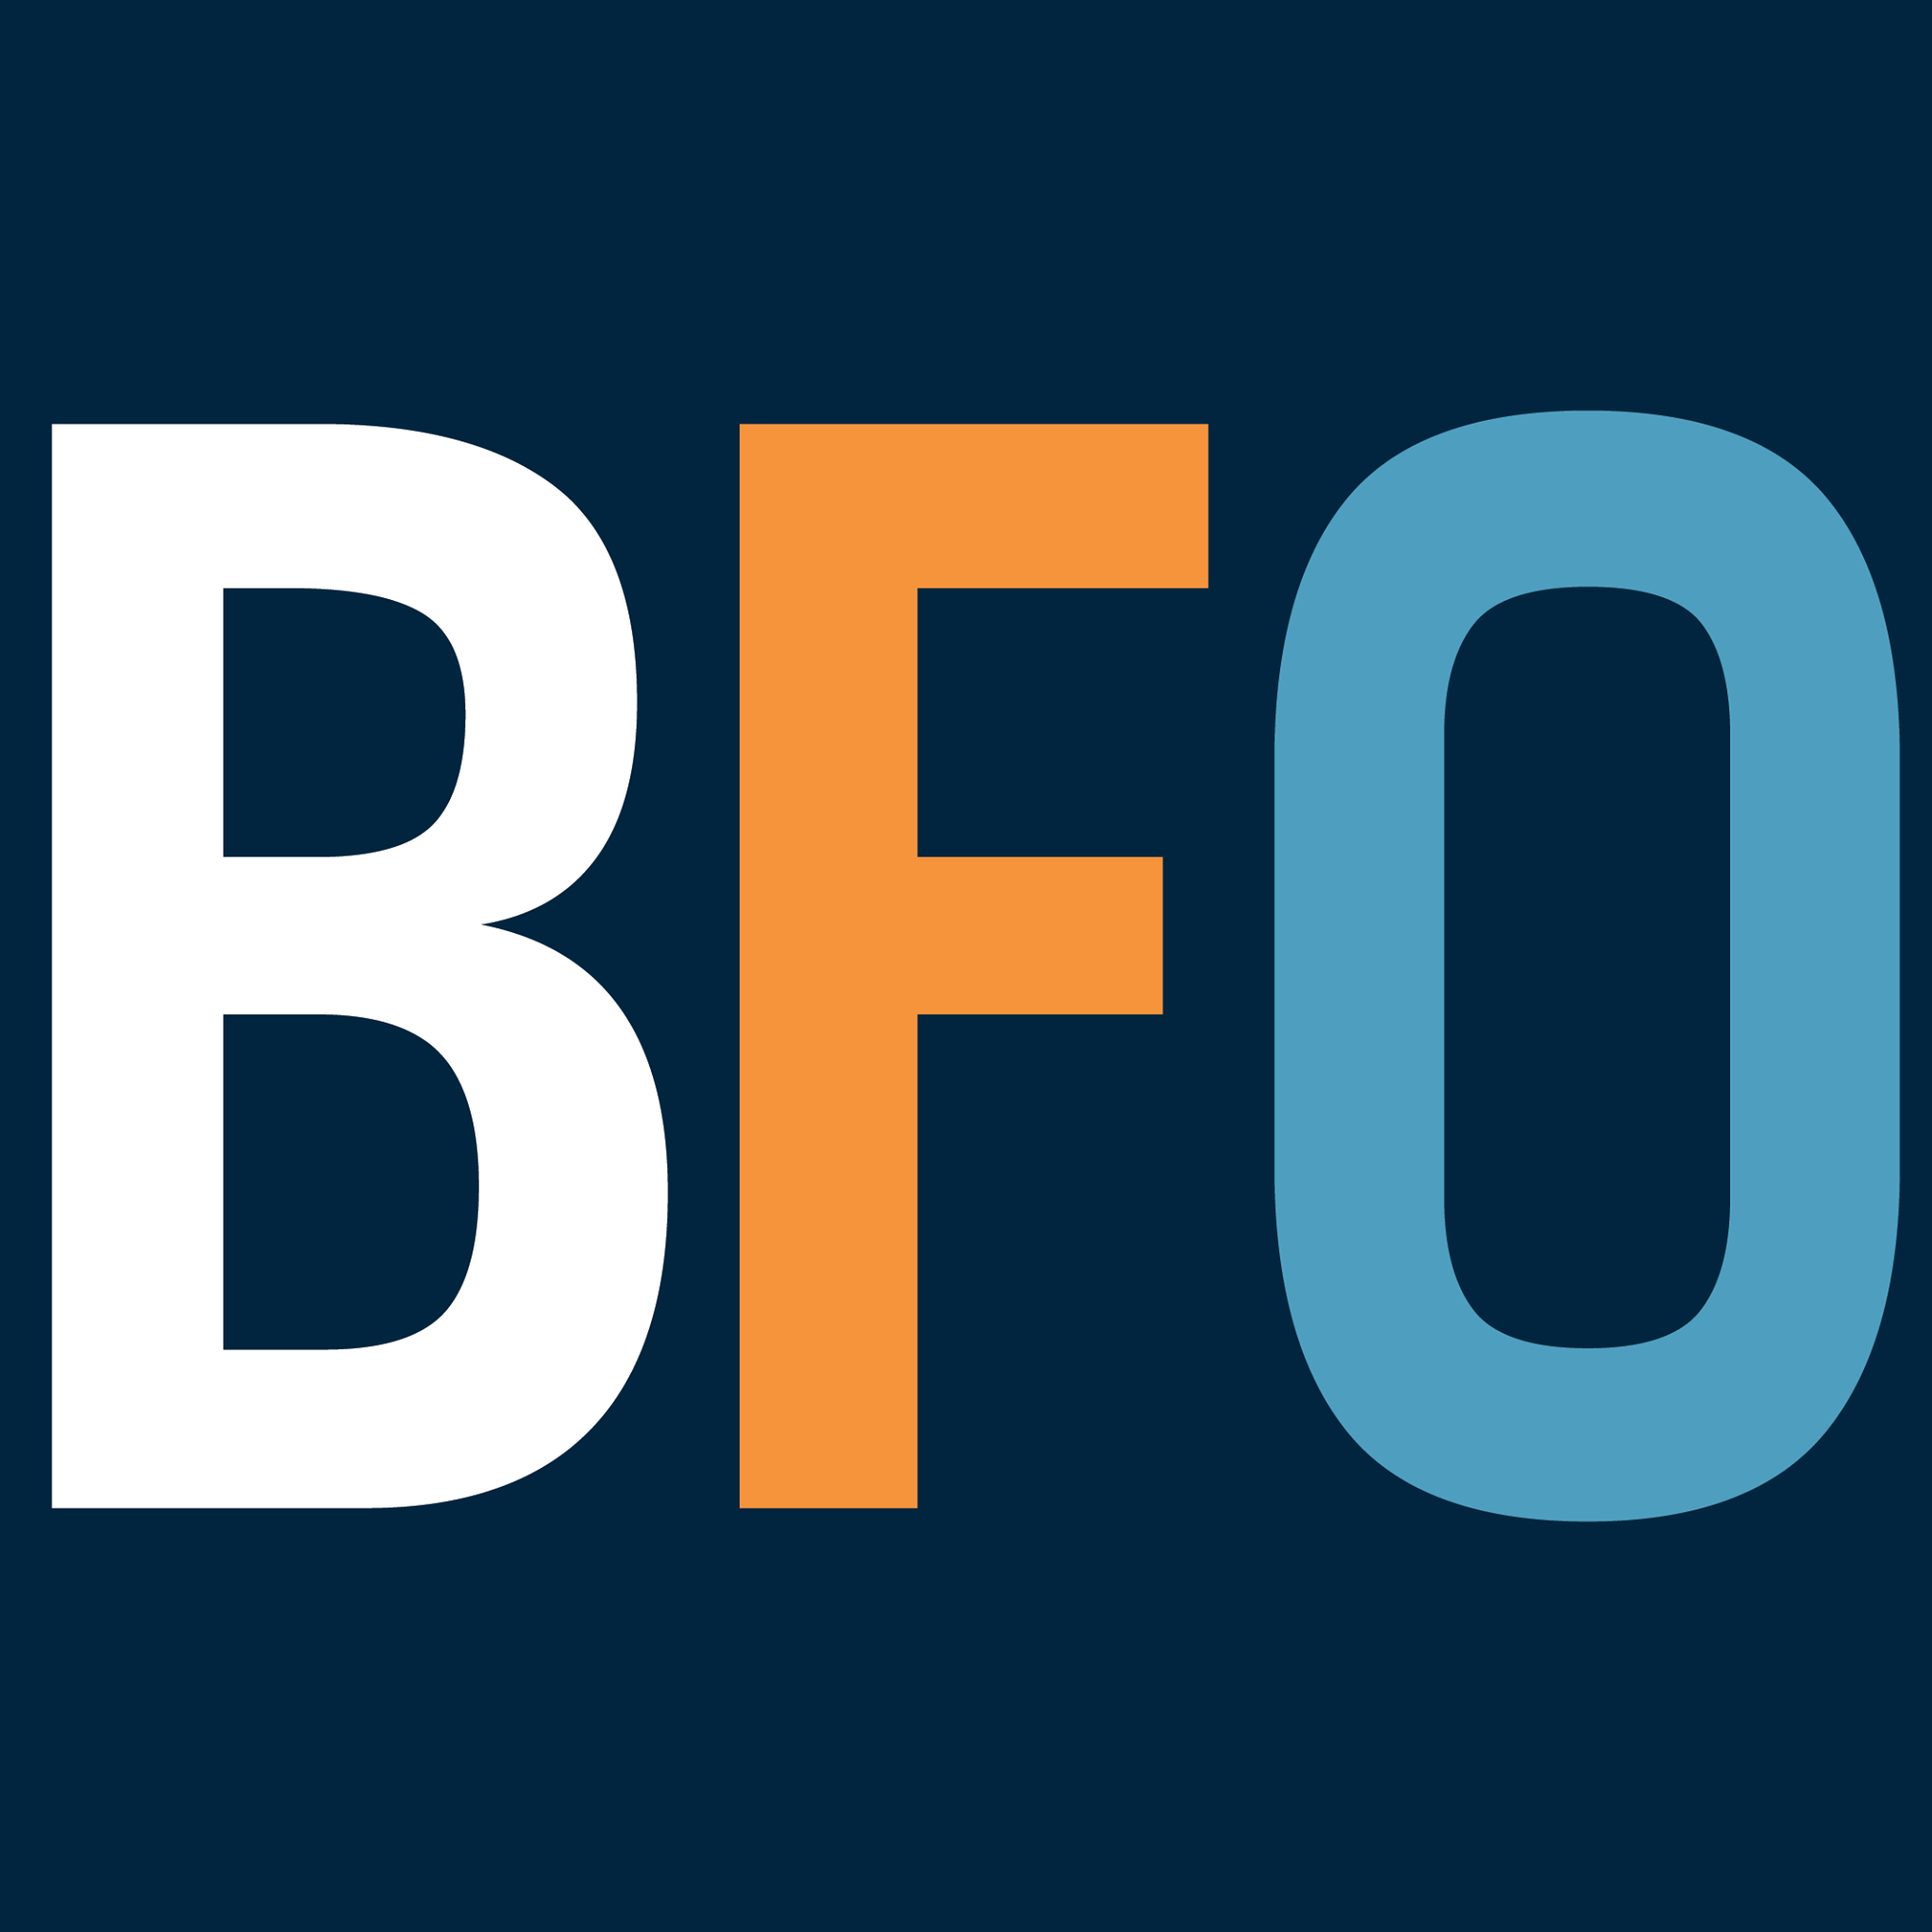 Business logo of Be Found Online - BFO